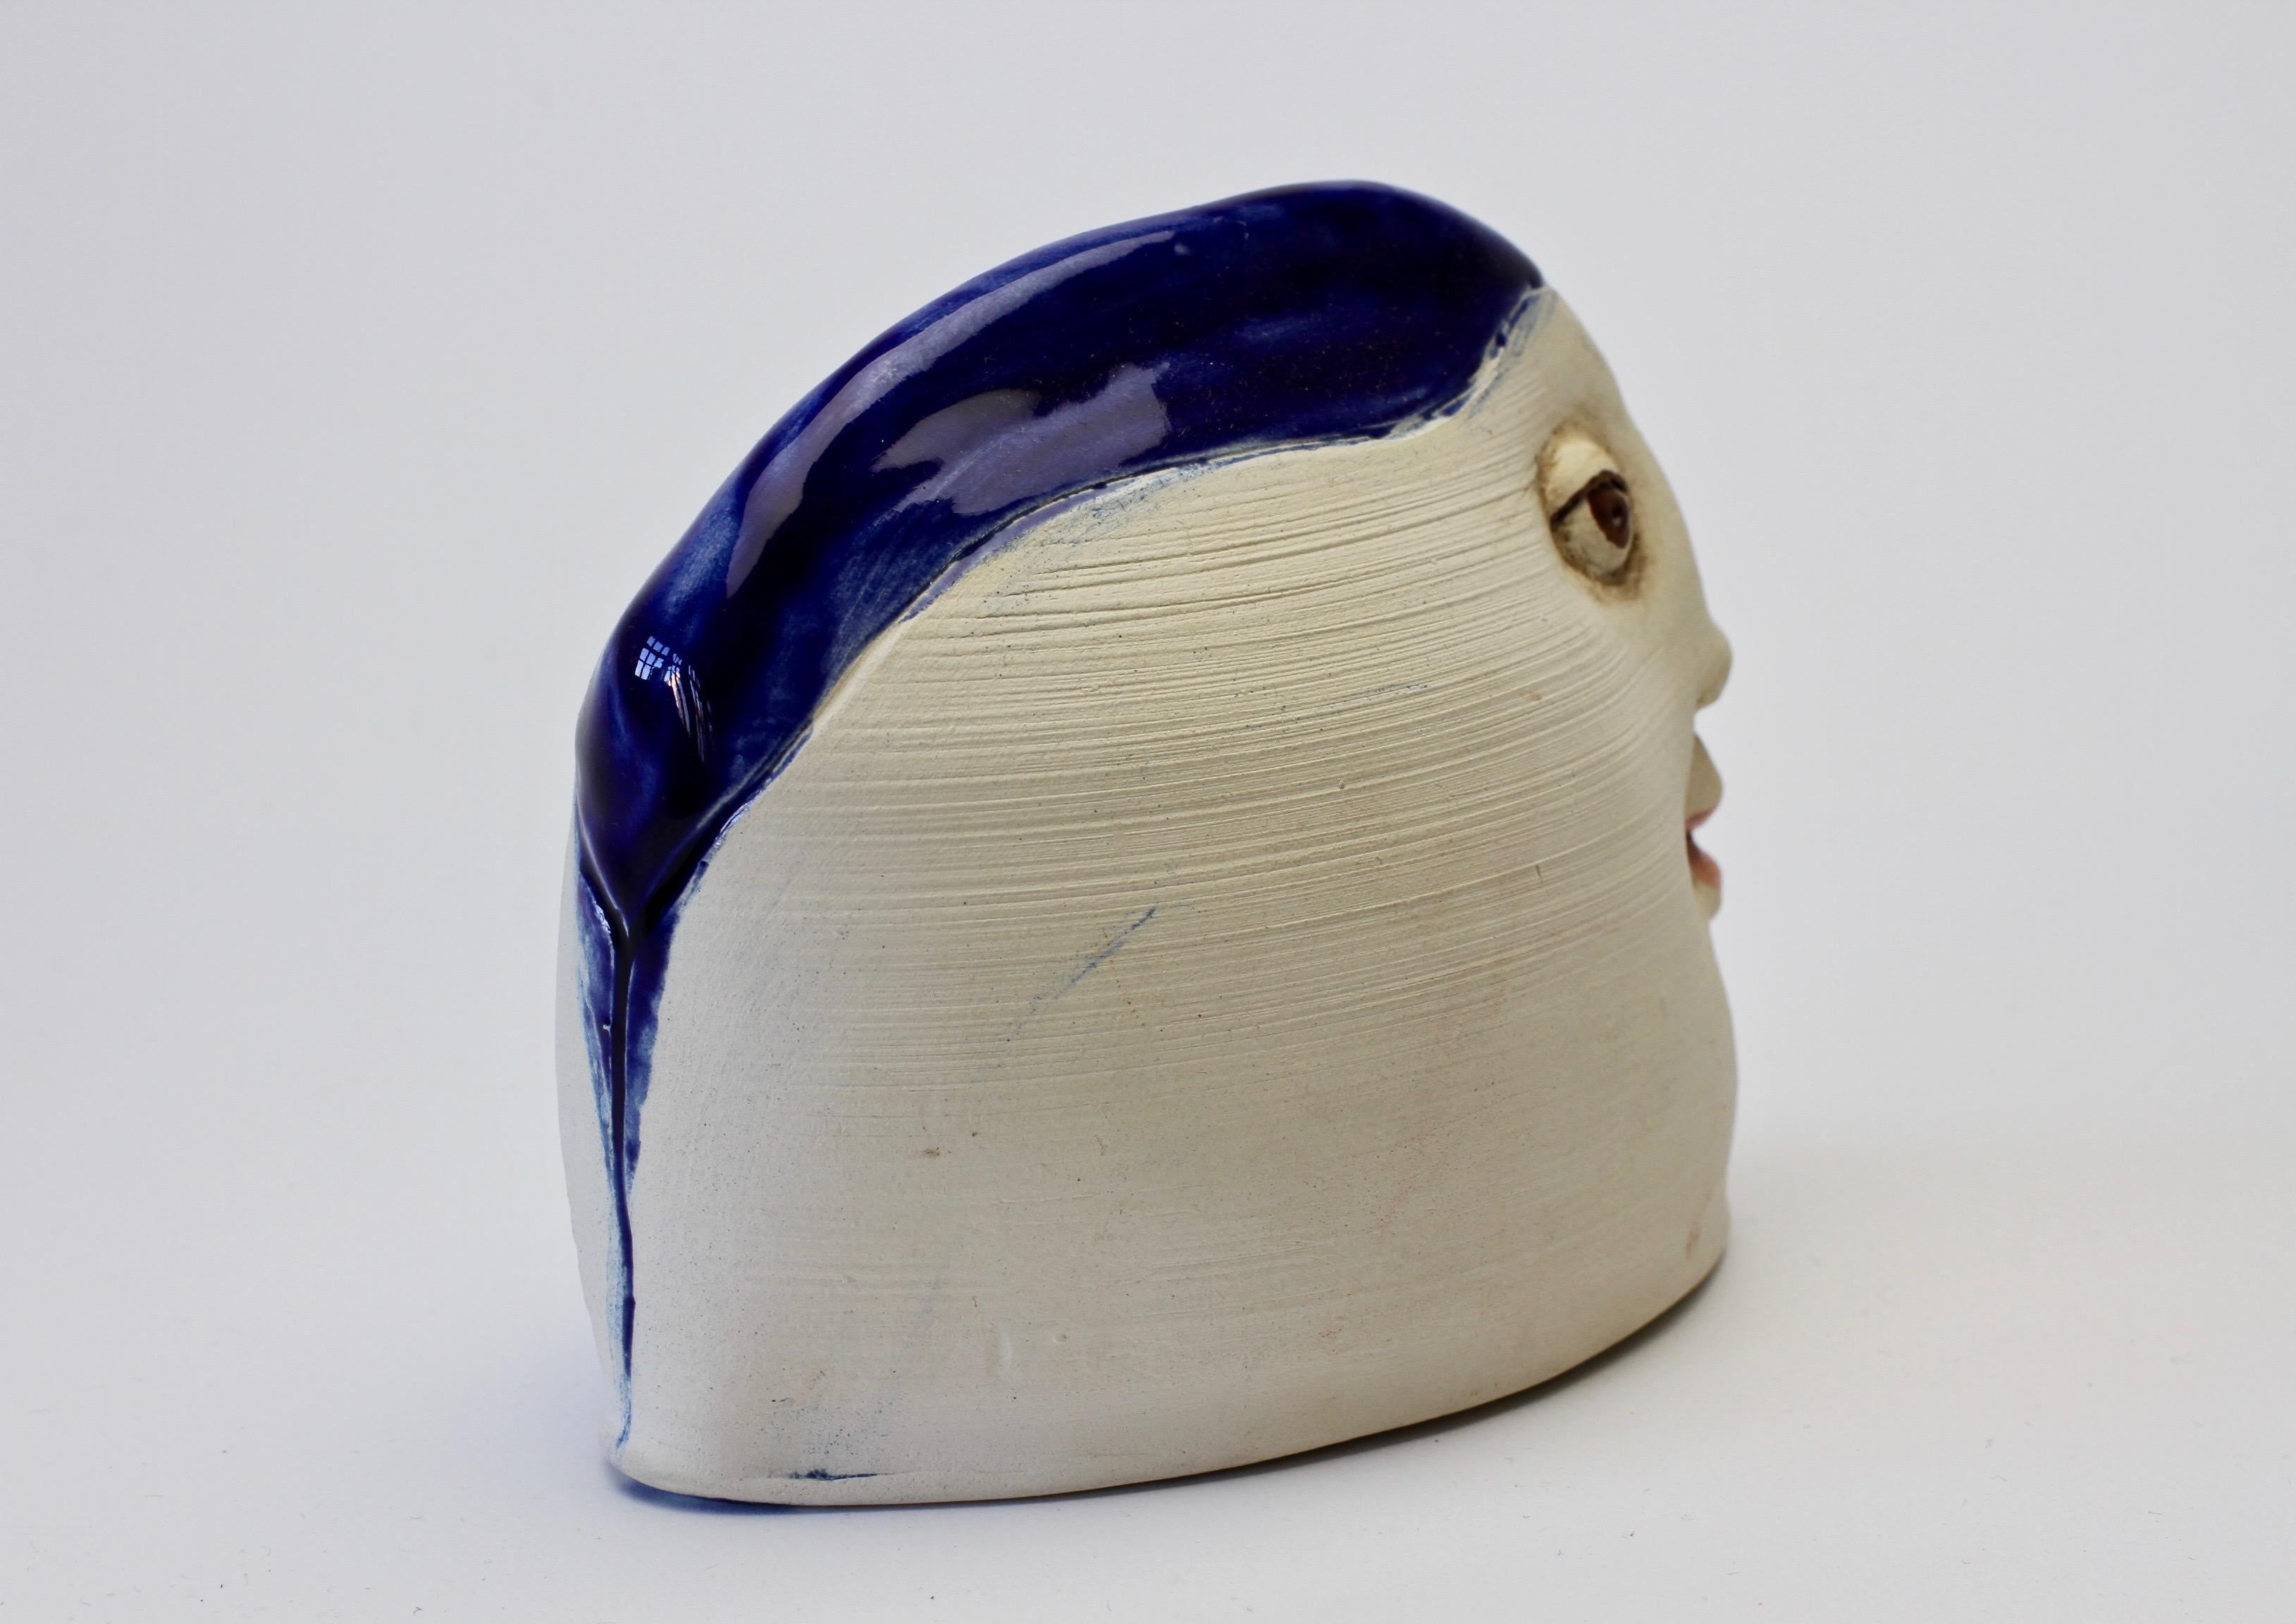 Unusual Quirky Vintage Hand Thrown Glazed Pottery Sculpture of a Head with Face  (Skandinavisch)